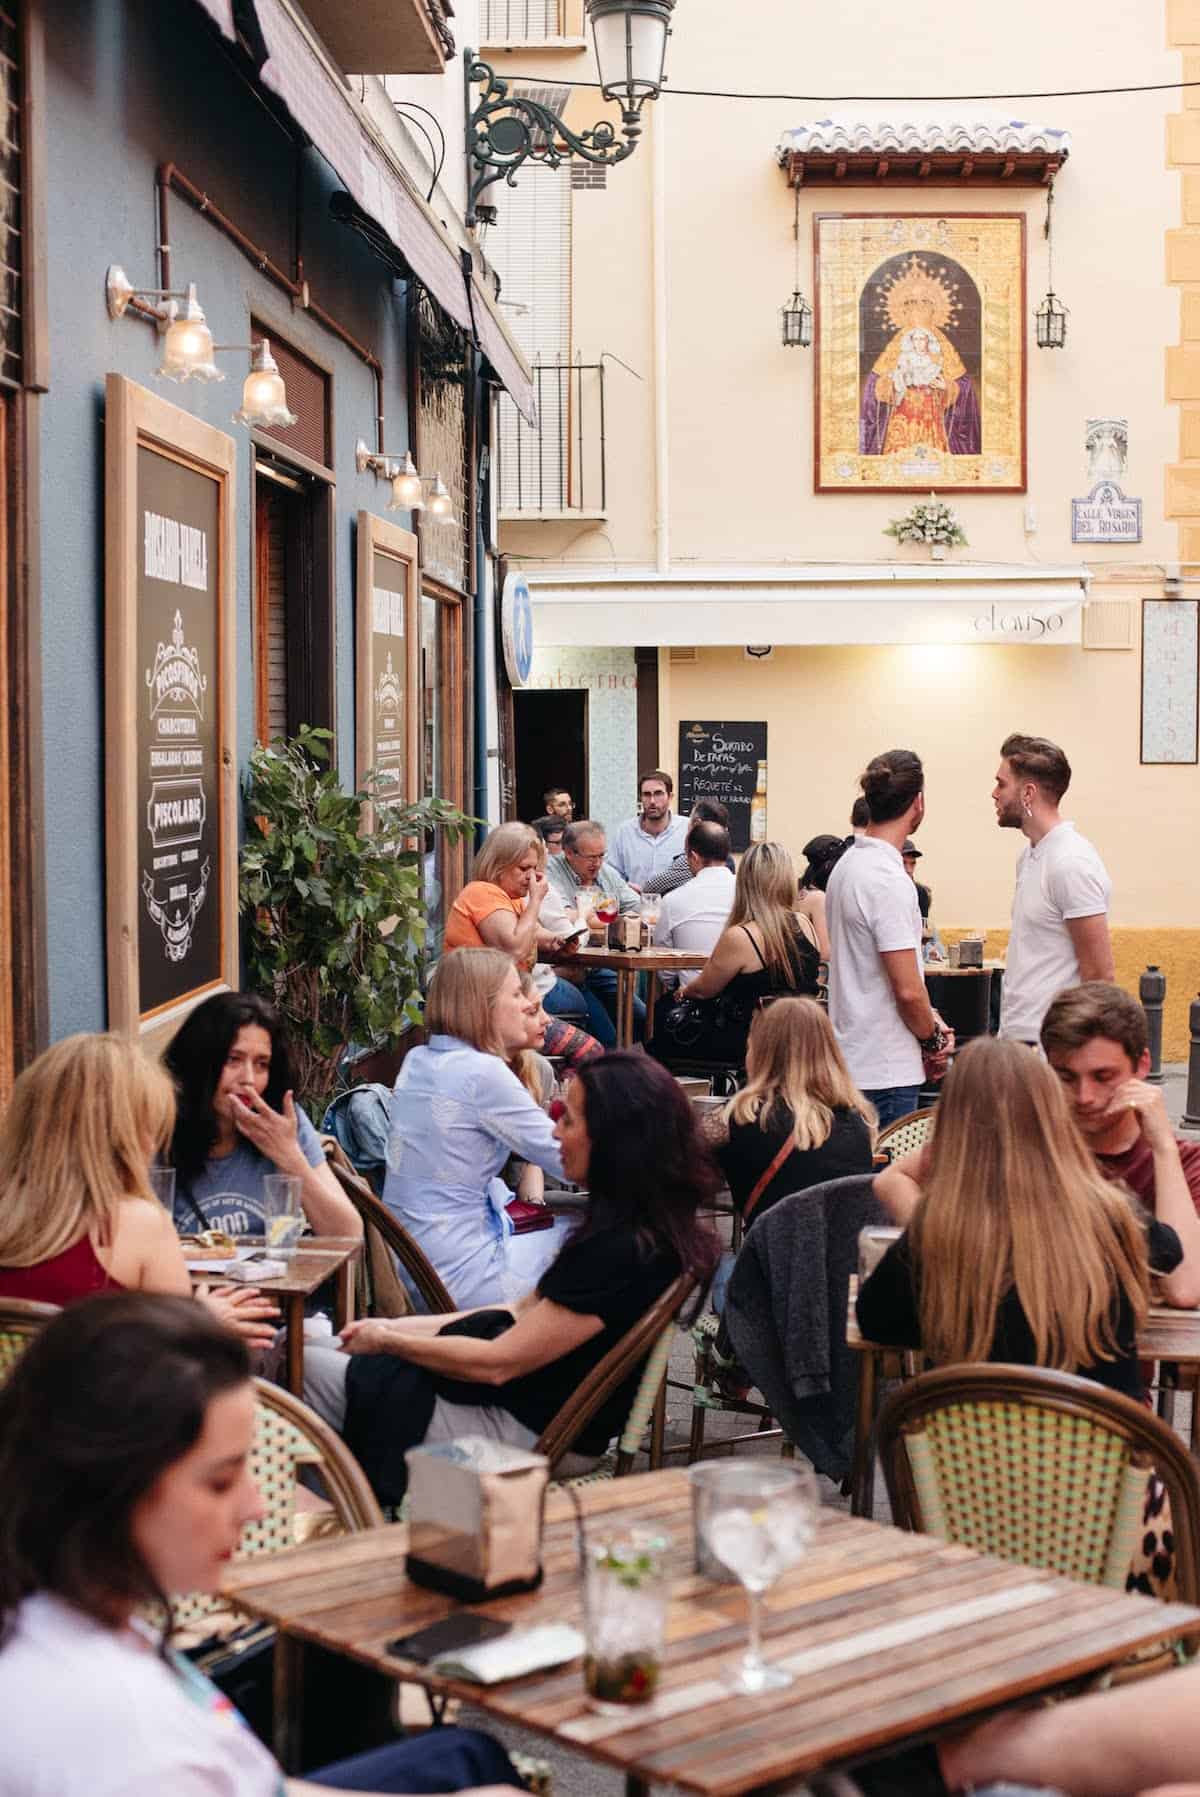 People eating and drinking on a crowded outdoor terrace outside a bar.